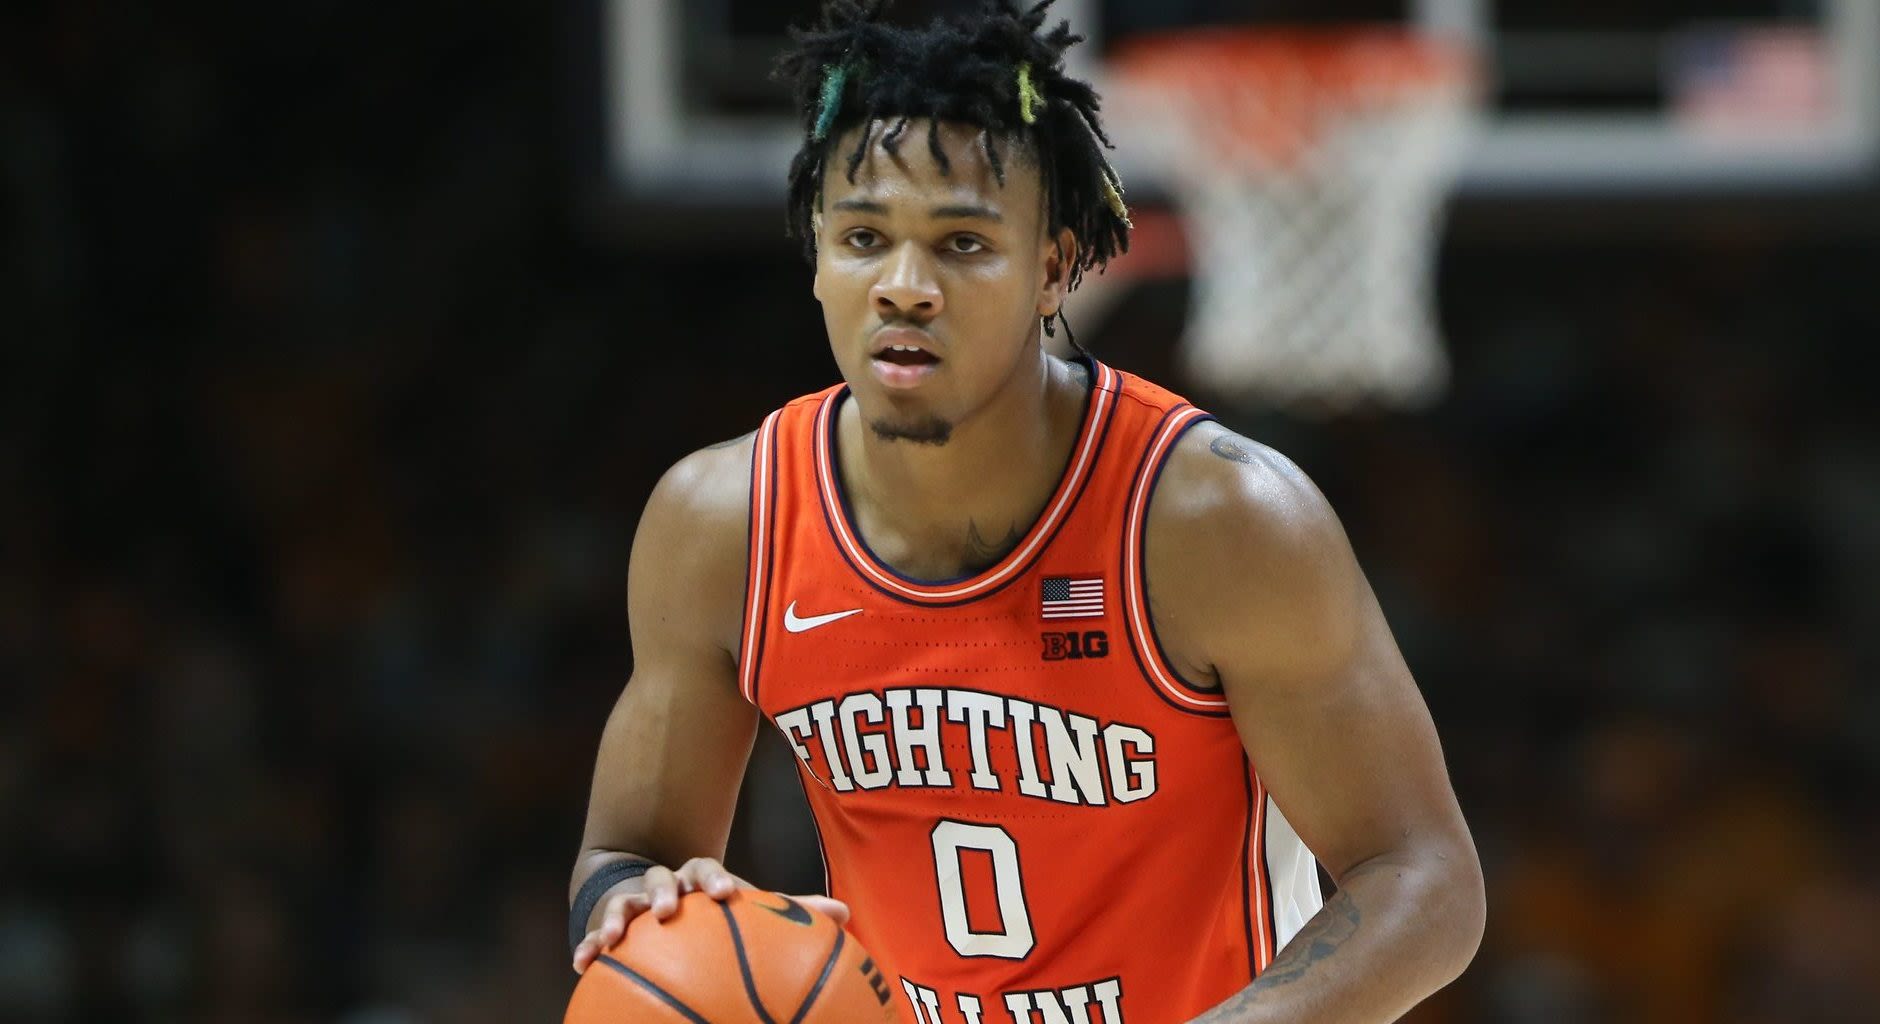 University of Illinois star Terrence Shannon Jr. addresses legal issues in advance of NBA Draft